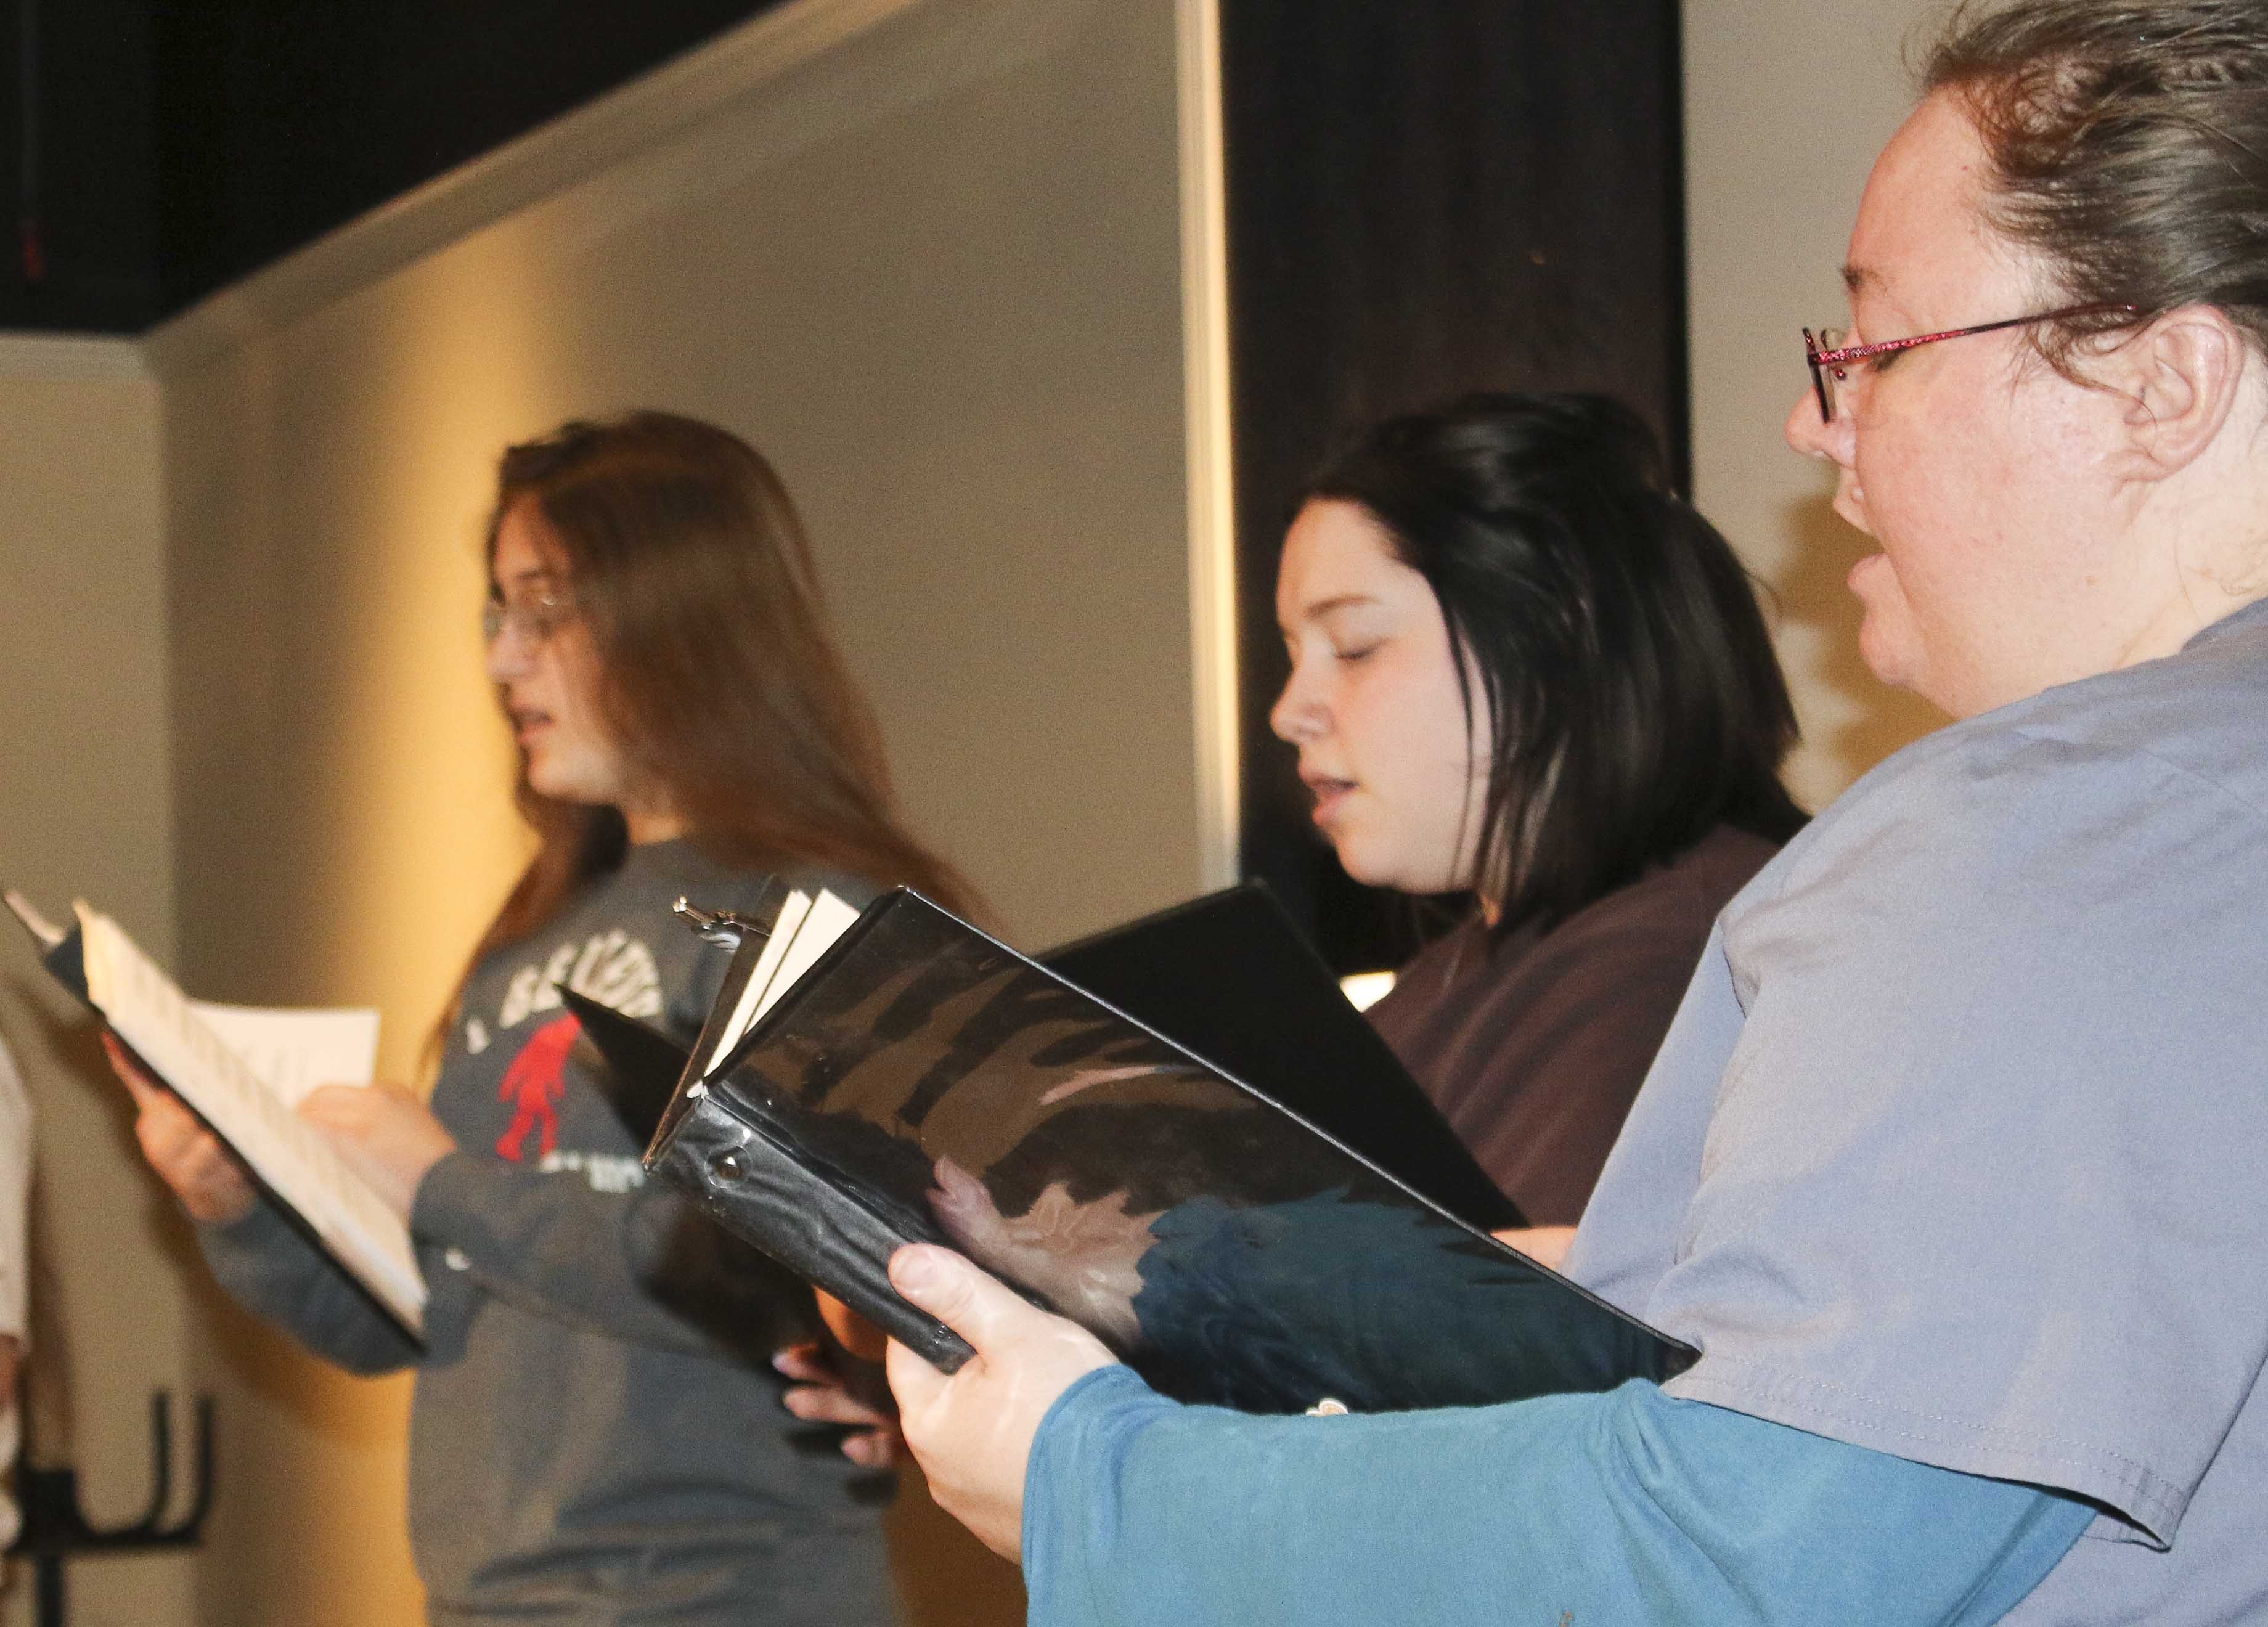 MCC offering choral clinic to prepare for all-state auditions